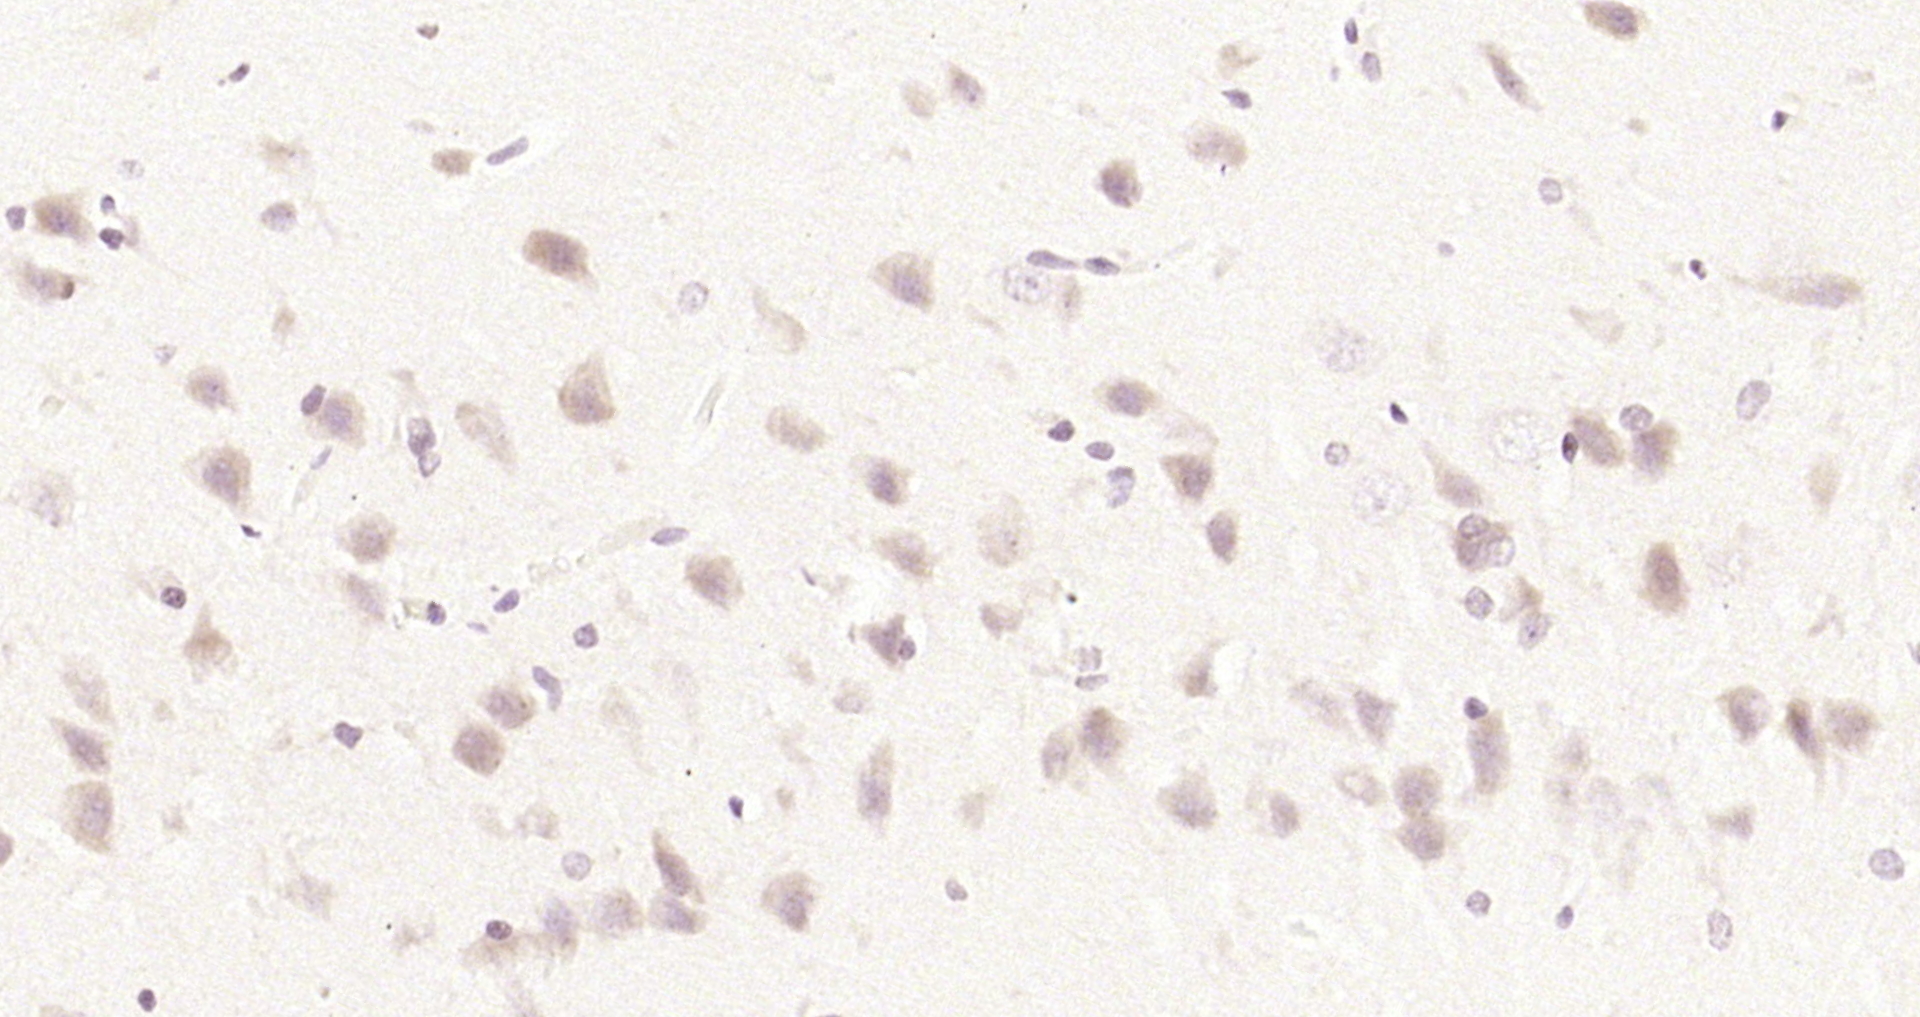 Paraformaldehyde-fixed, paraffin embedded Rat brain; Antigen retrieval by boiling in sodium citrate buffer (pH6.0) for 15min; Block endogenous peroxidase by 3% hydrogen peroxide for 20 minutes; Blocking buffer (normal goat serum) at 37°C for 30min; Antibody incubation with FBXW8 Polyclonal Antibody, Unconjugated (bs-8395R) at 1:200 overnight at 4°C, DAB staining.